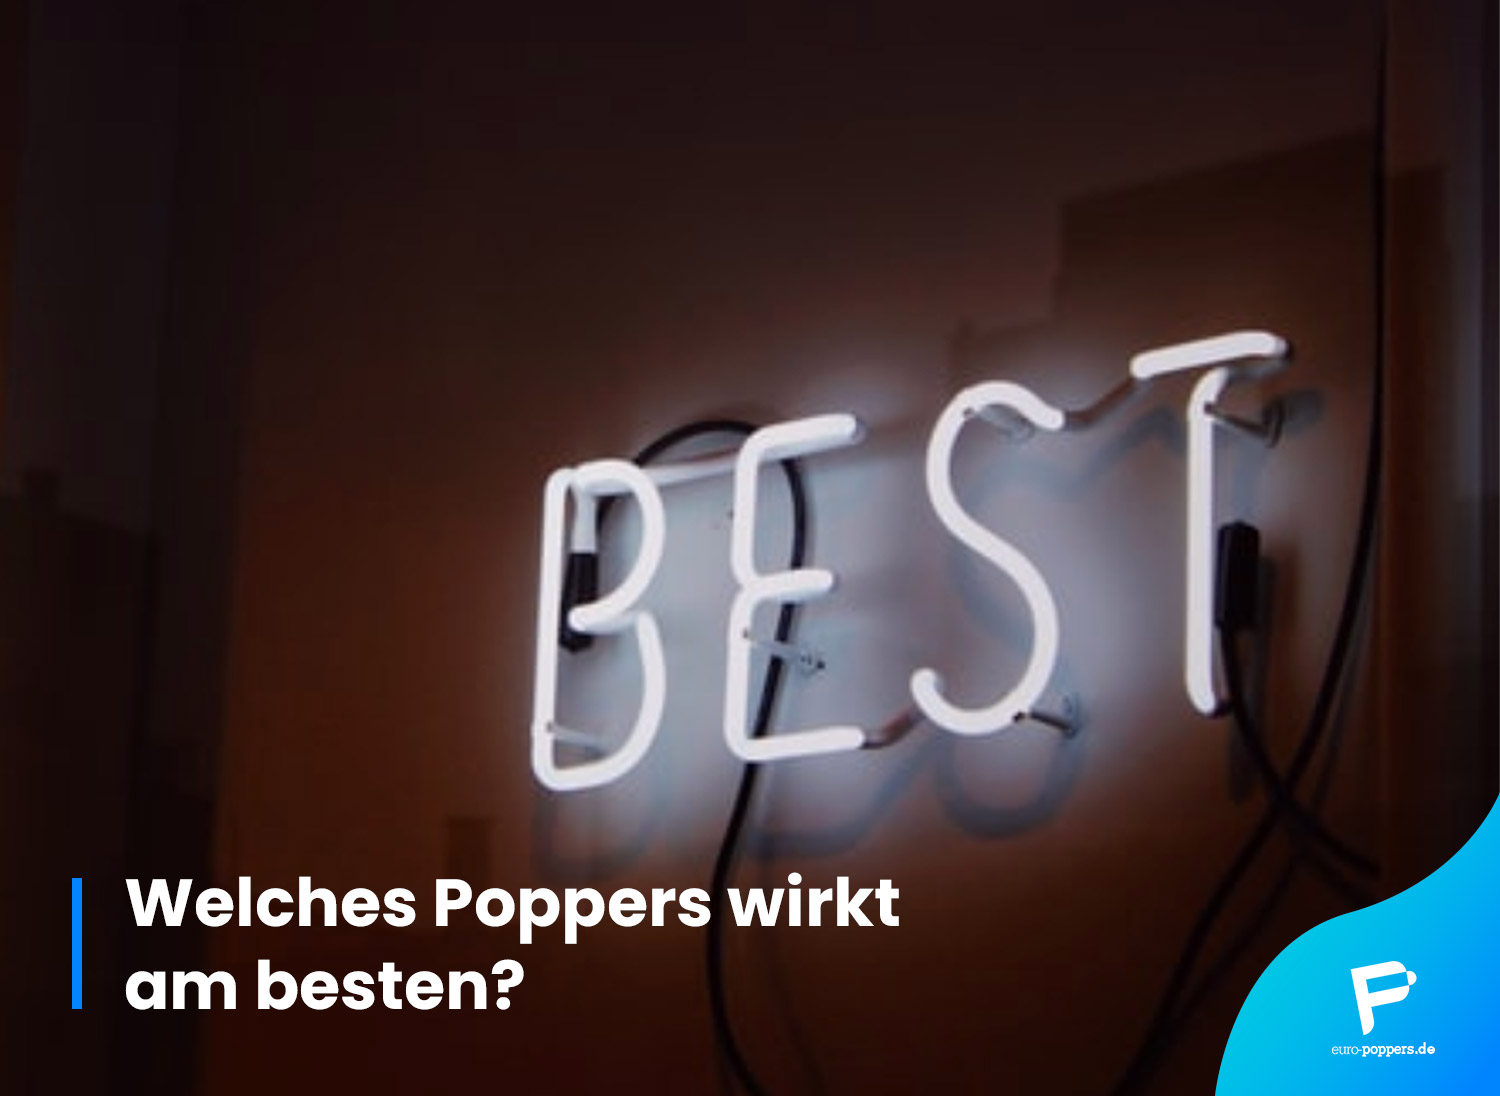 You are currently viewing Welches Poppers wirkt am besten?